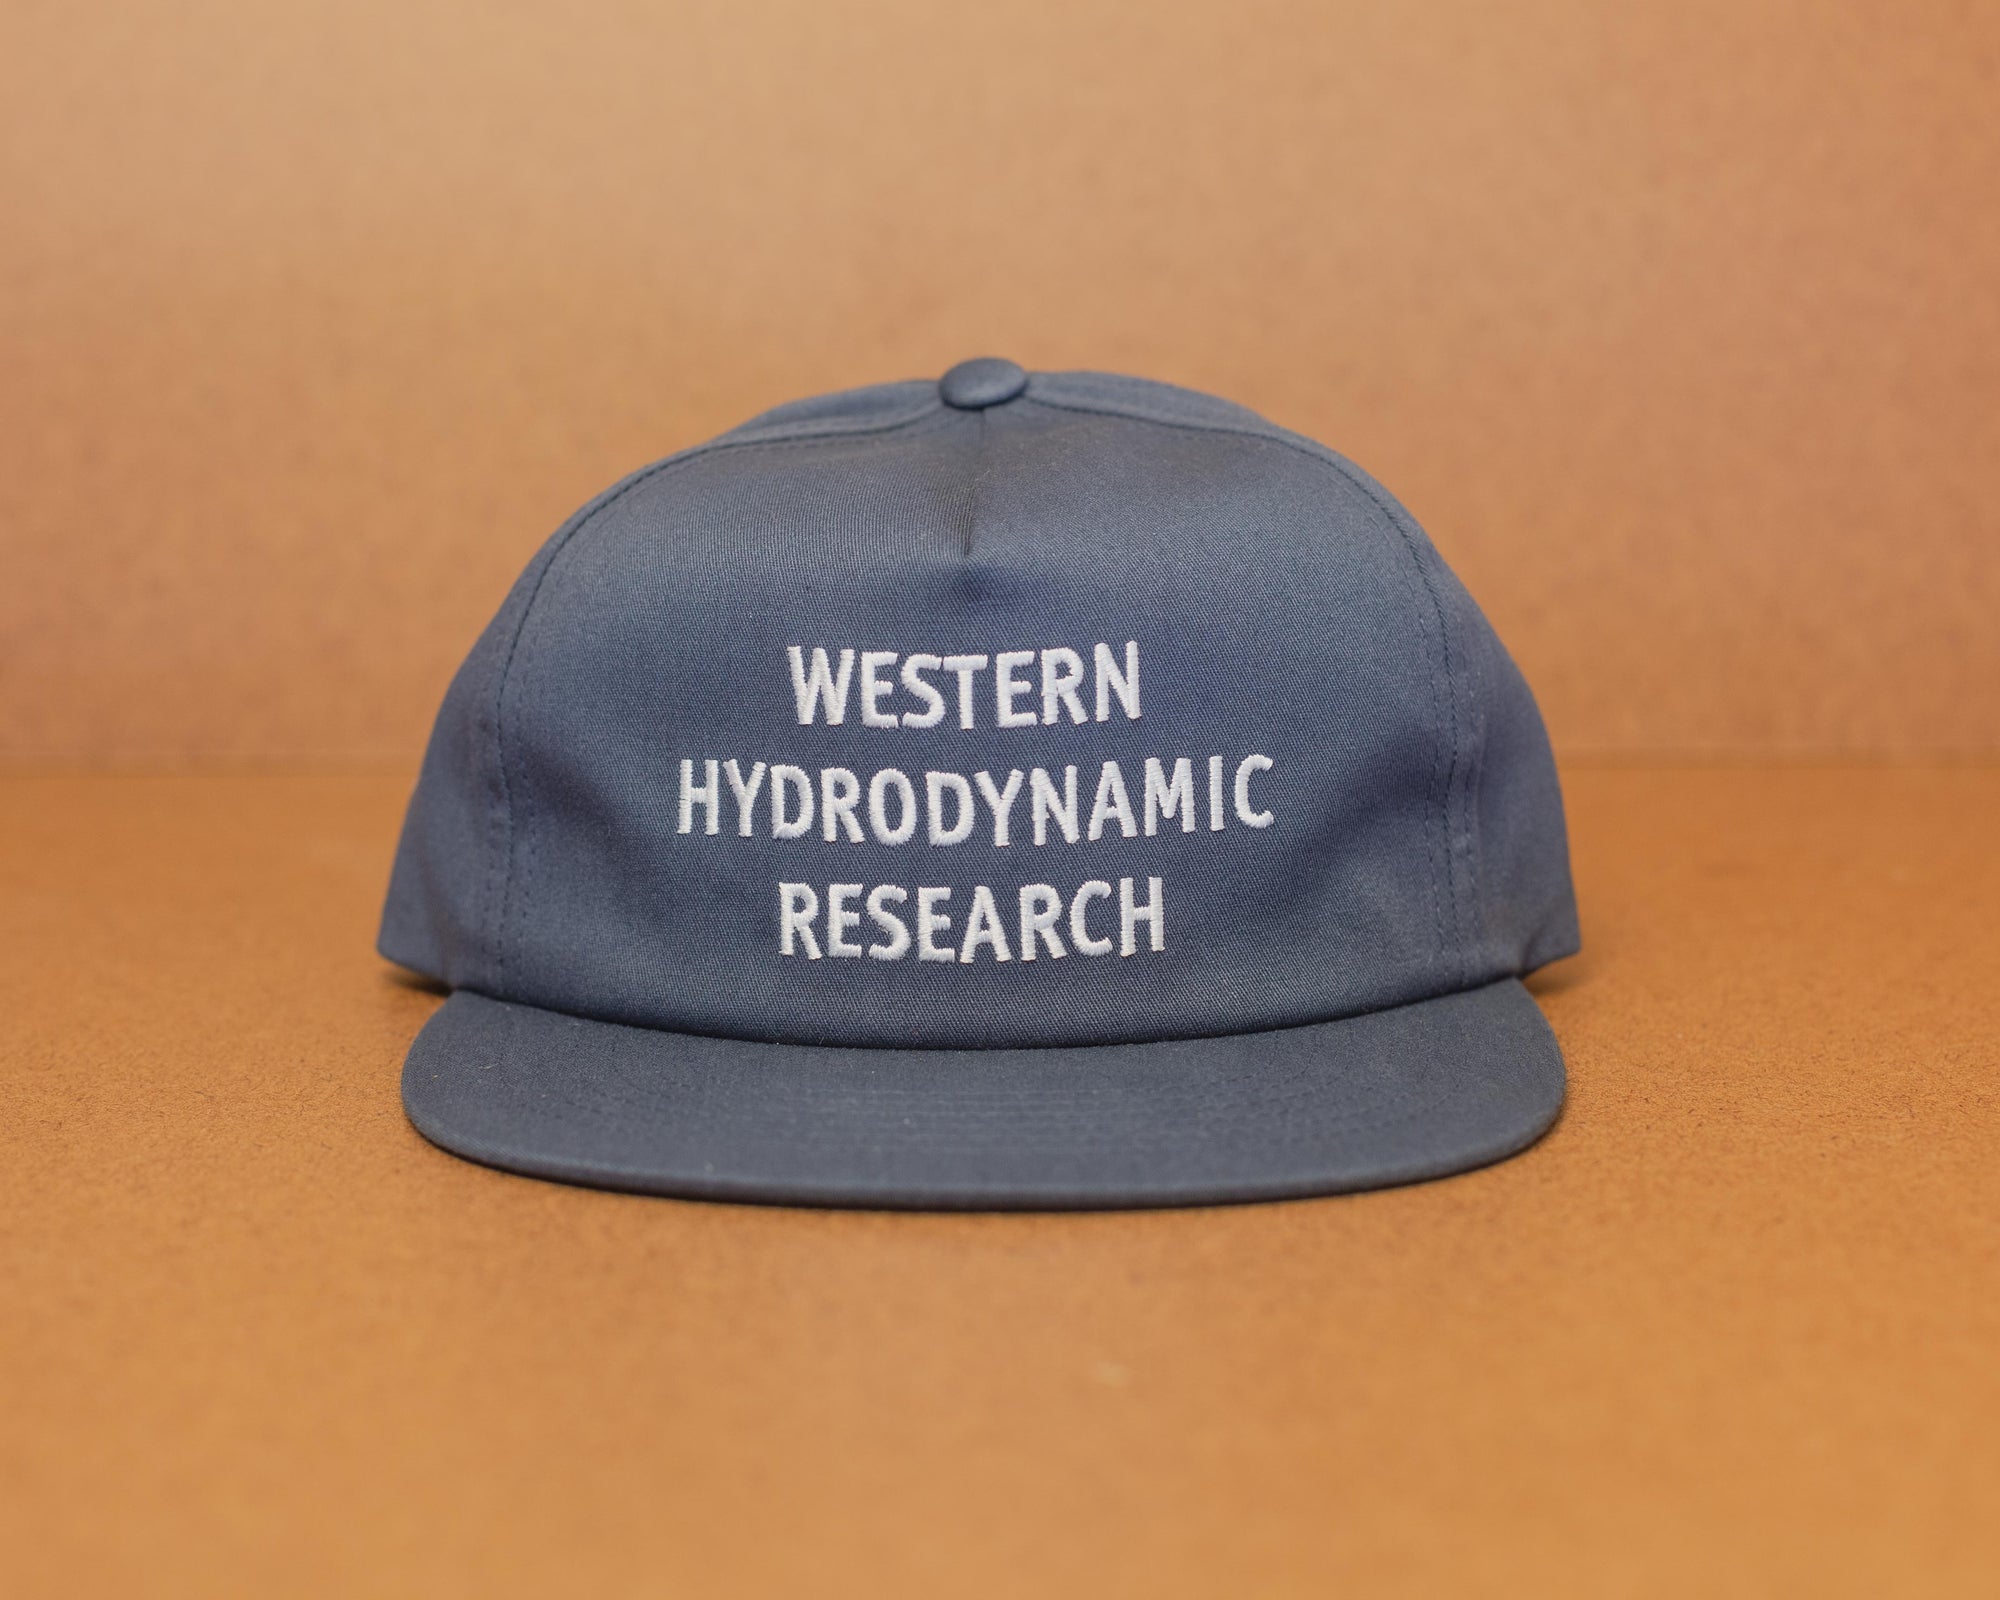 Western Hydrodynamic Research- Canvas Promotional Hat (Navy) brown background